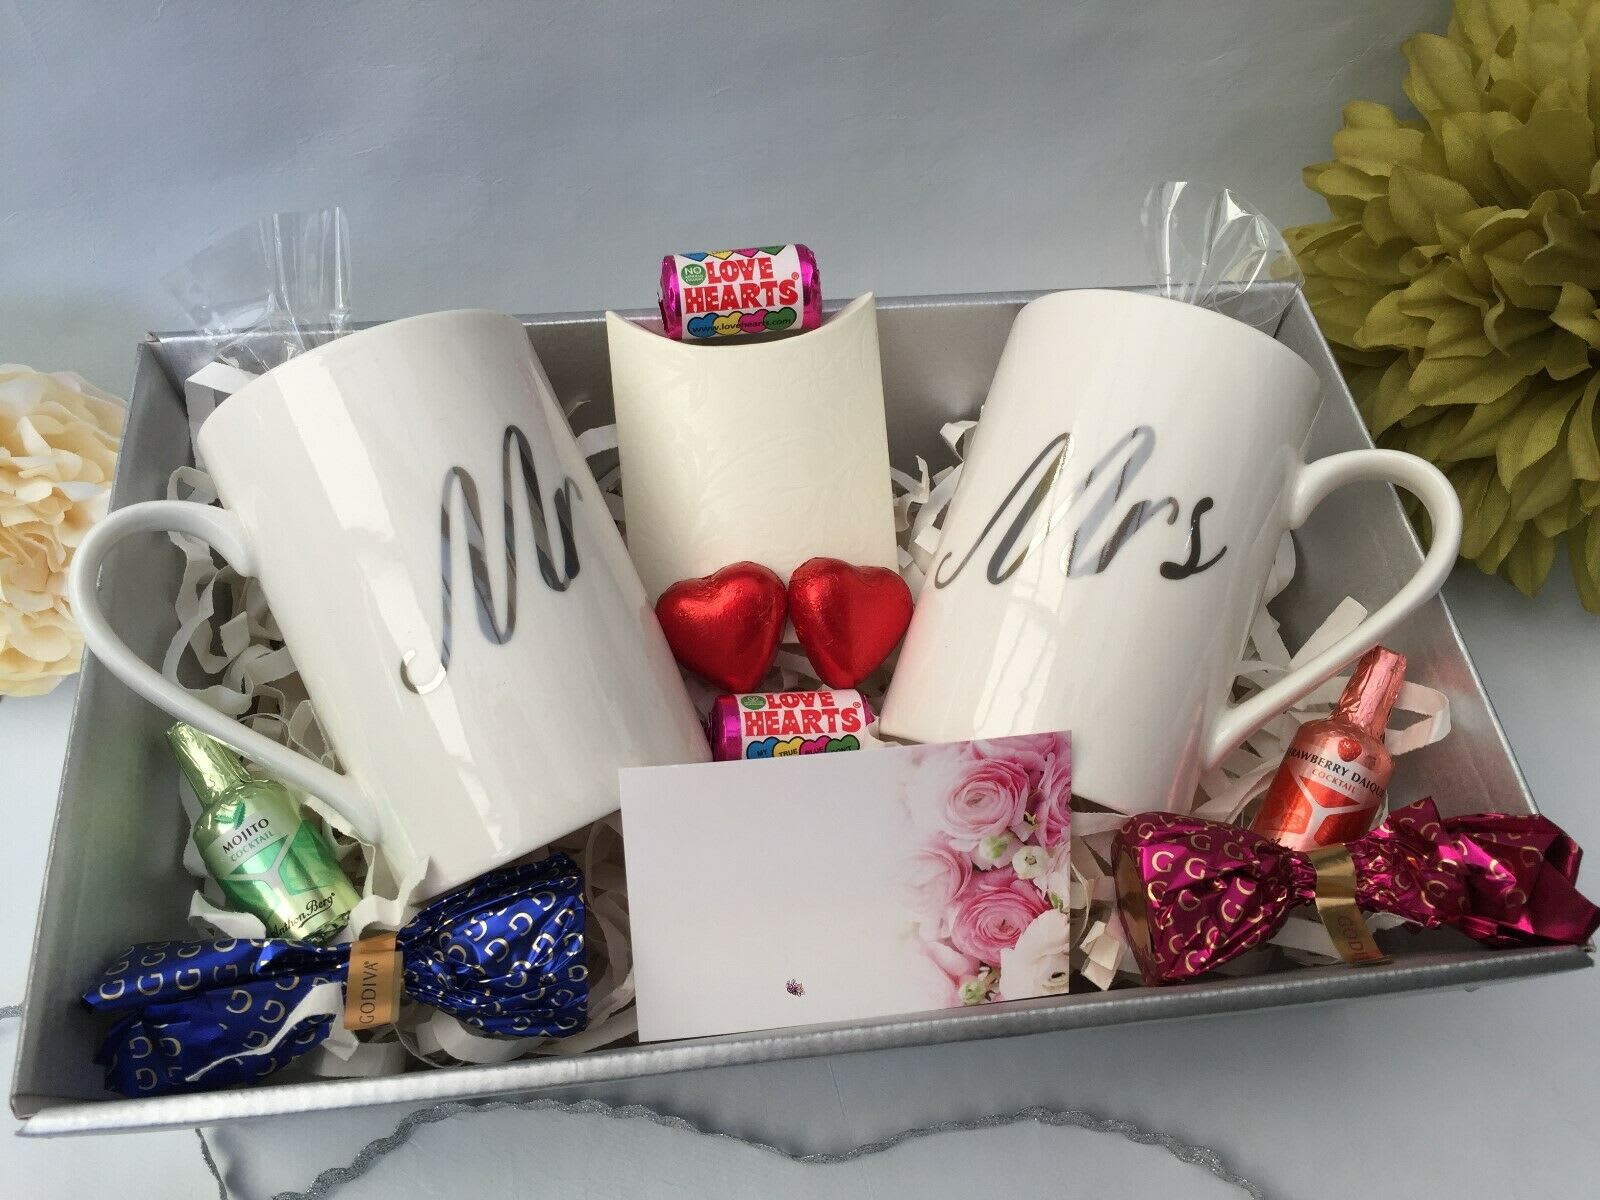 PERSONALISED MOTHER OF The Groom Wedding Gift Box Hamper Thank You Present  £22.99 - PicClick UK